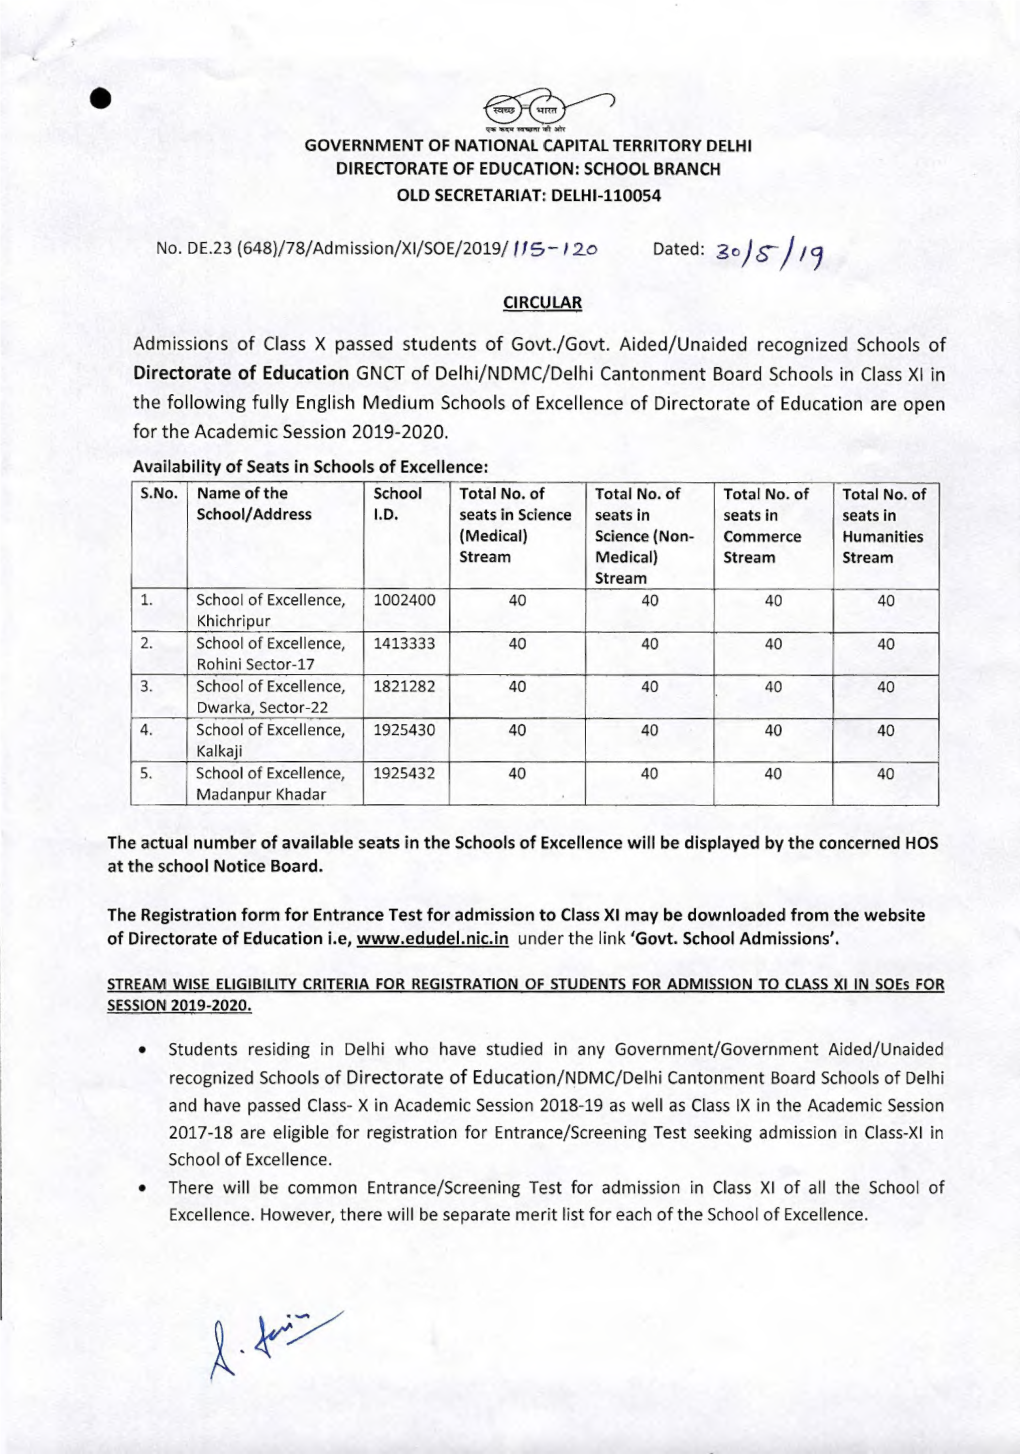 Registration of Students for Admission to Class XI in Schools Of